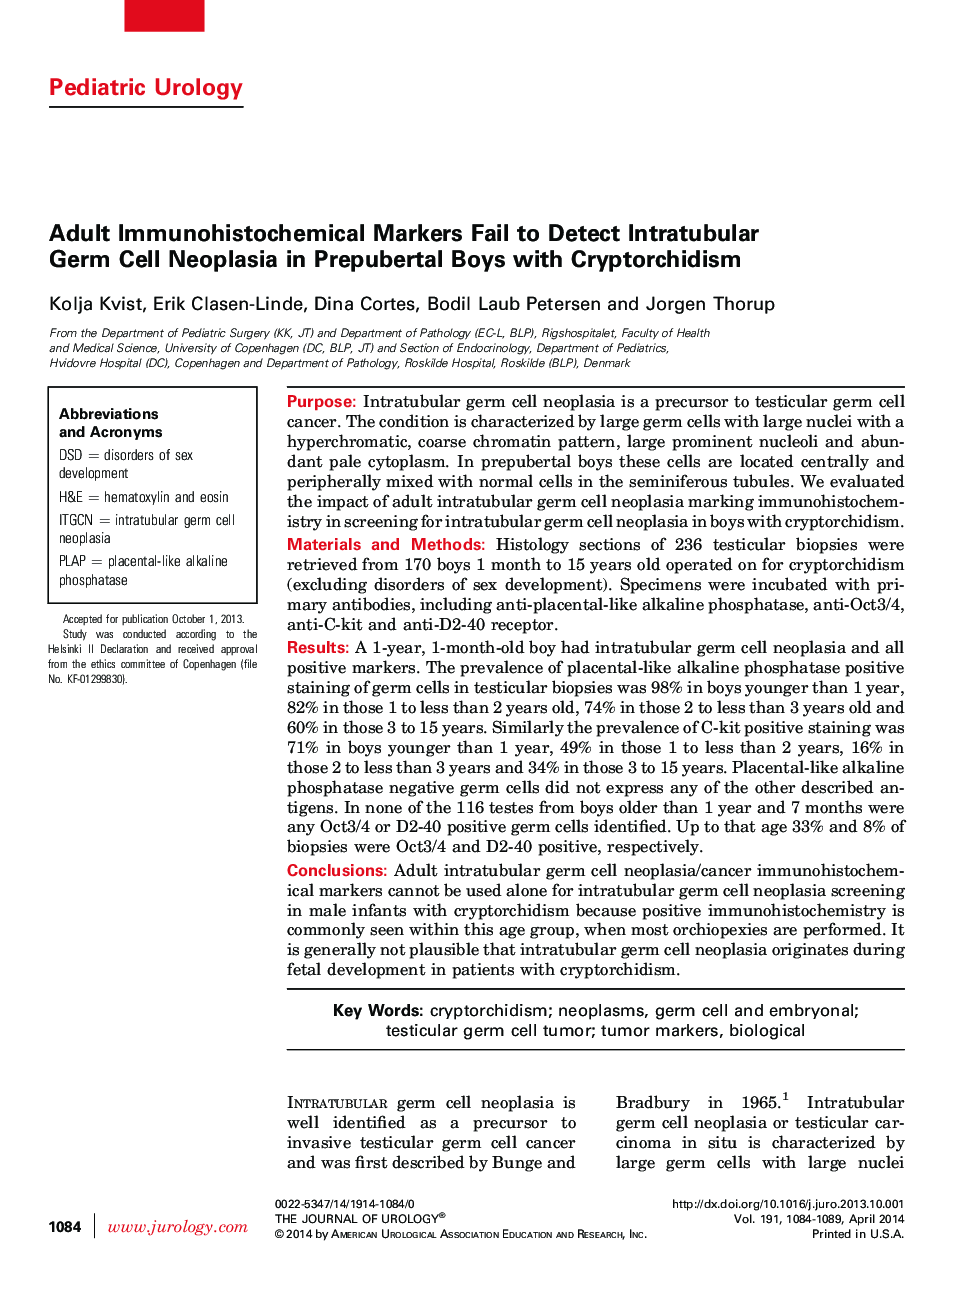 Adult Immunohistochemical Markers Fail to Detect Intratubular Germ Cell Neoplasia in Prepubertal Boys with Cryptorchidism 